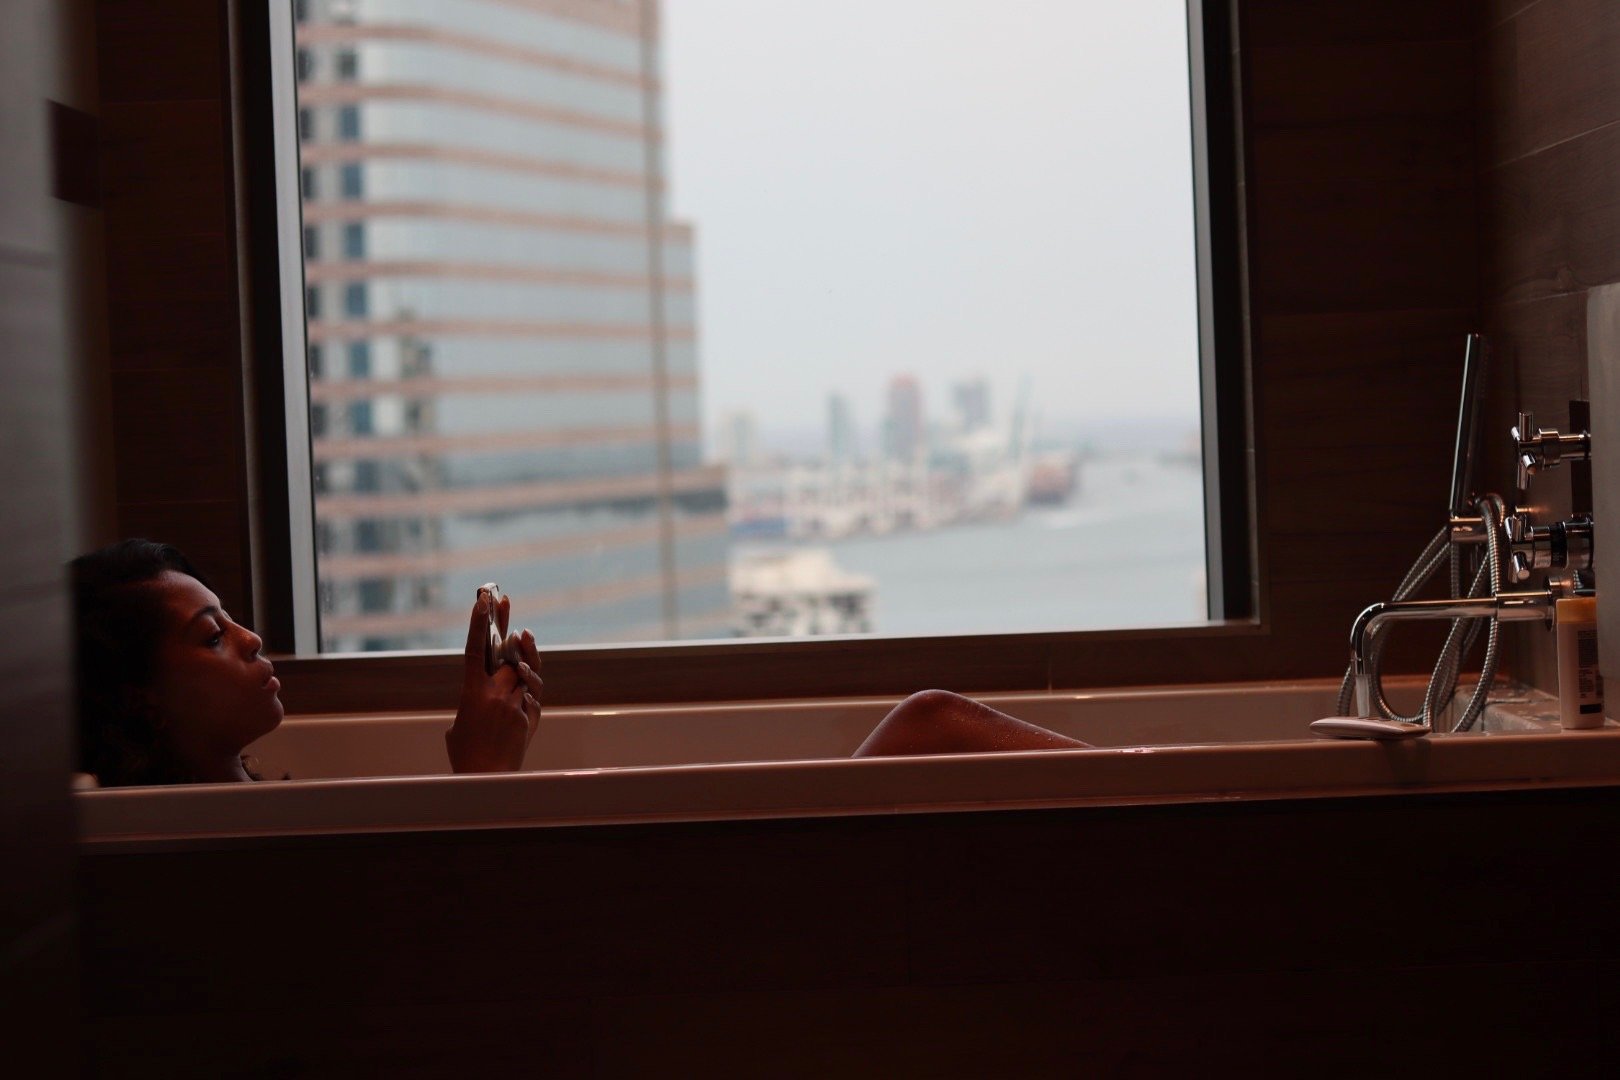 Girl in Bathtub with City View